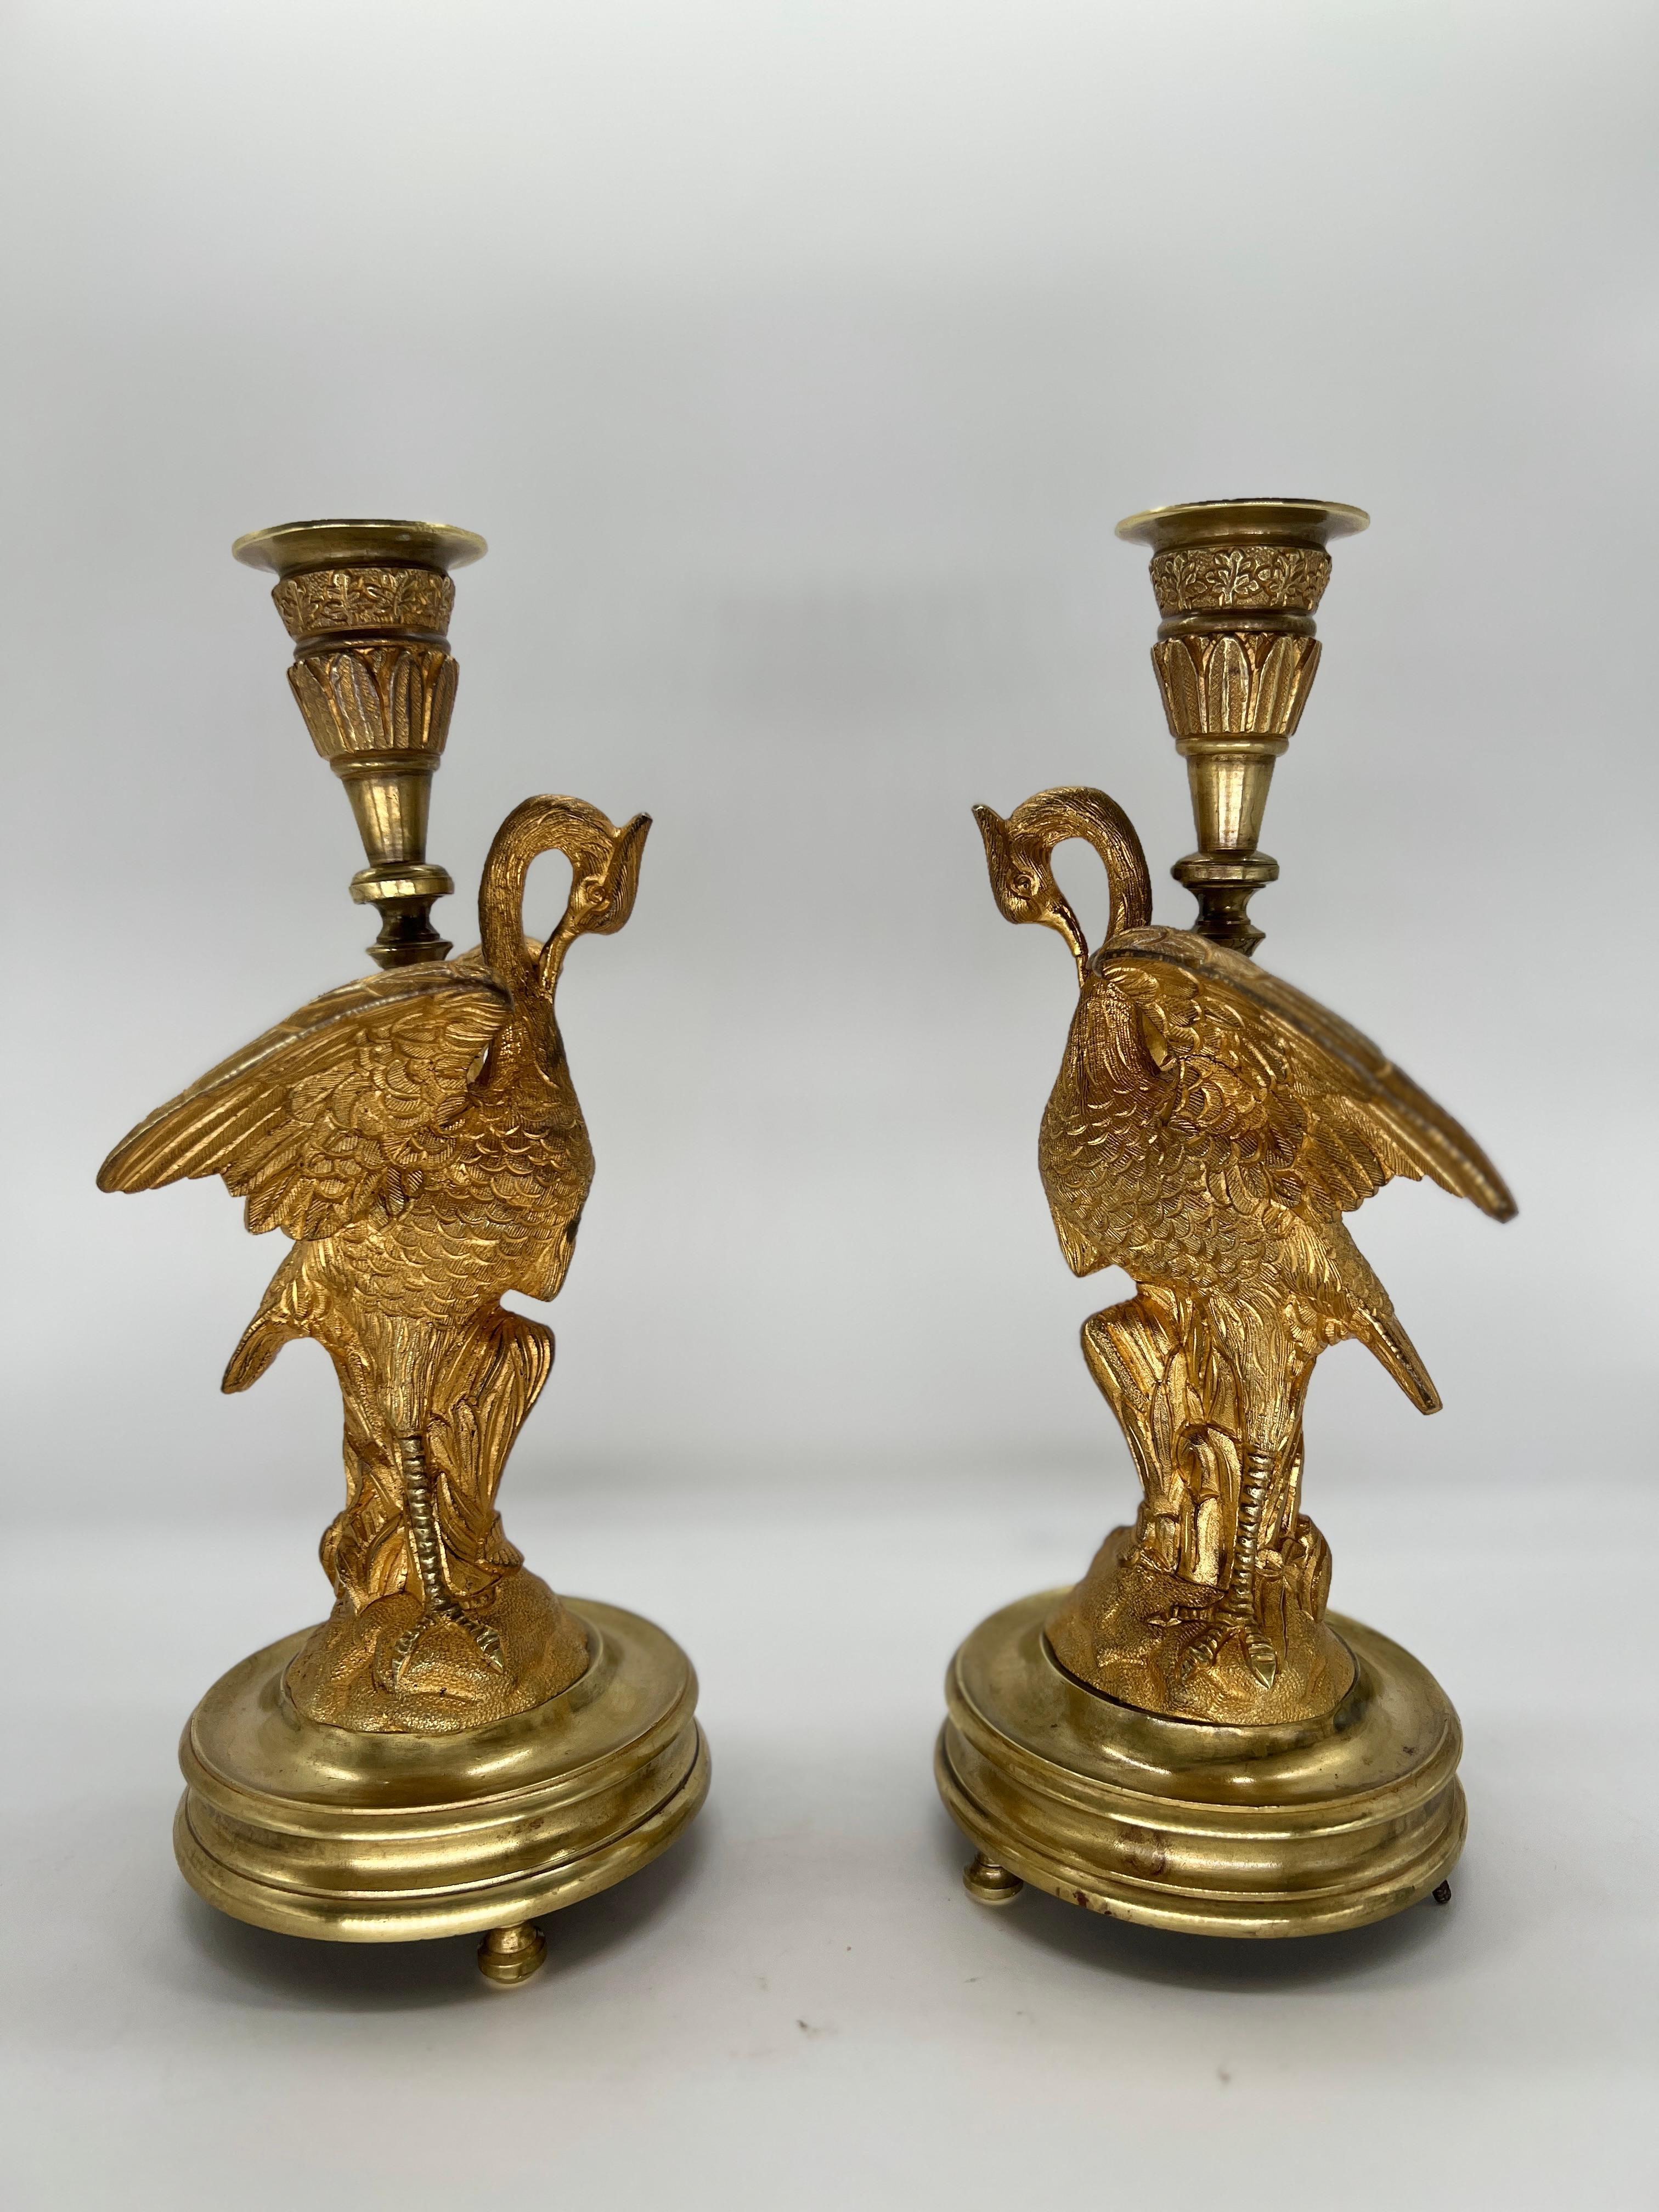 French, circa 1815. 

This exquisite pair of French Empire gilt bronze candlesticks, crafted circa 1815, embodies the opulence and grandeur of the Empire style. Each candlestick features a graceful crane motif, symbolizing longevity and prosperity,